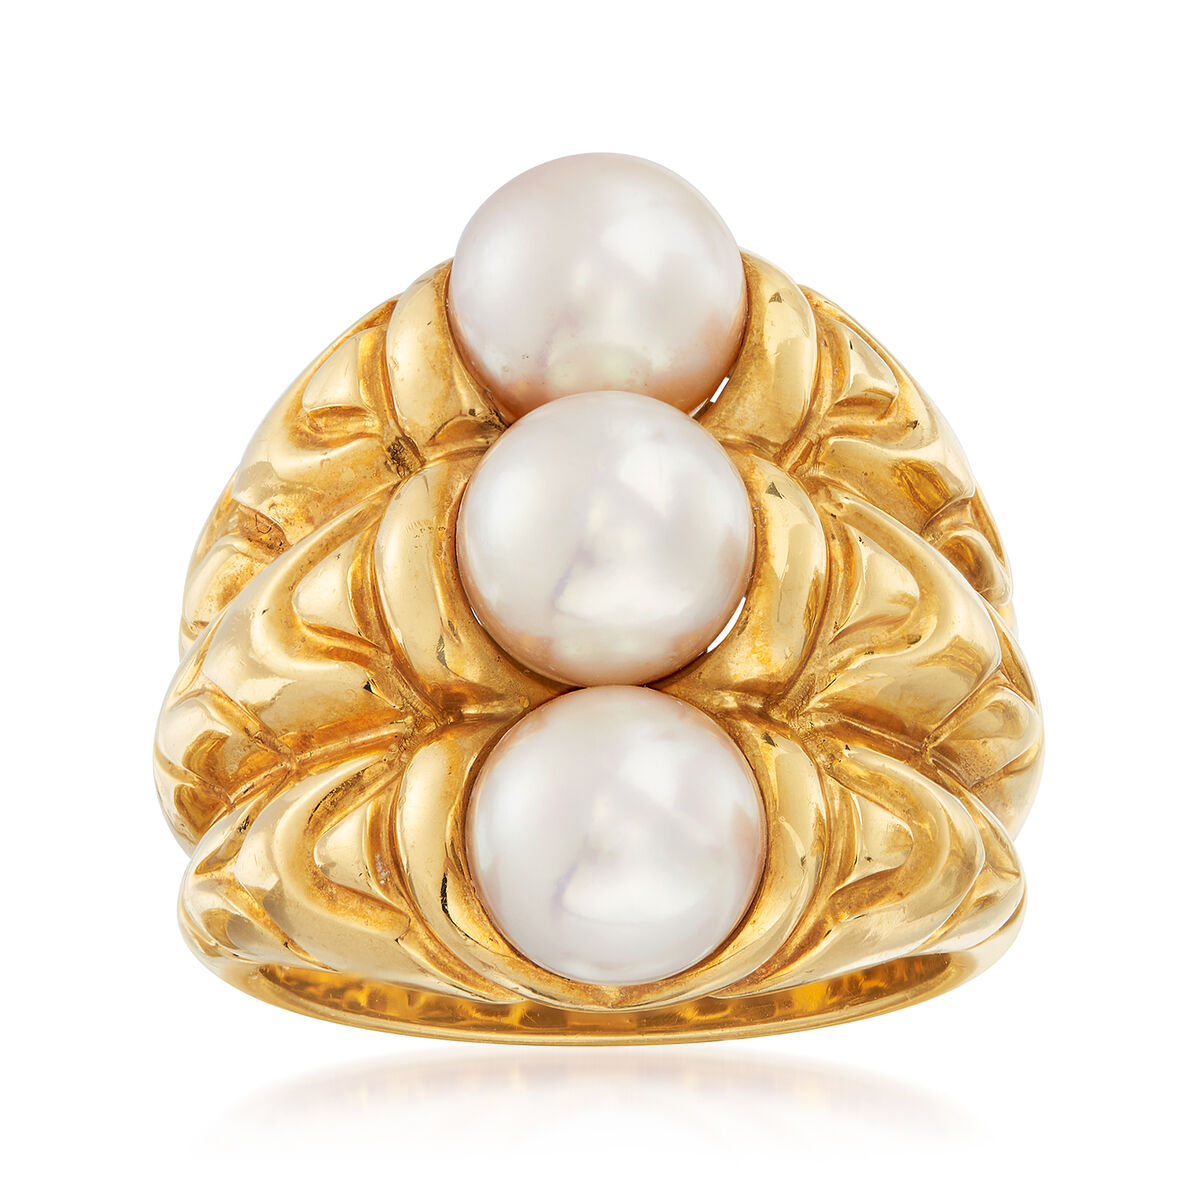 C. 1980 Vintage Bulgari 7mm Cultured Pearl Ring in 18kt Yellow Gold |  Ross-Simons